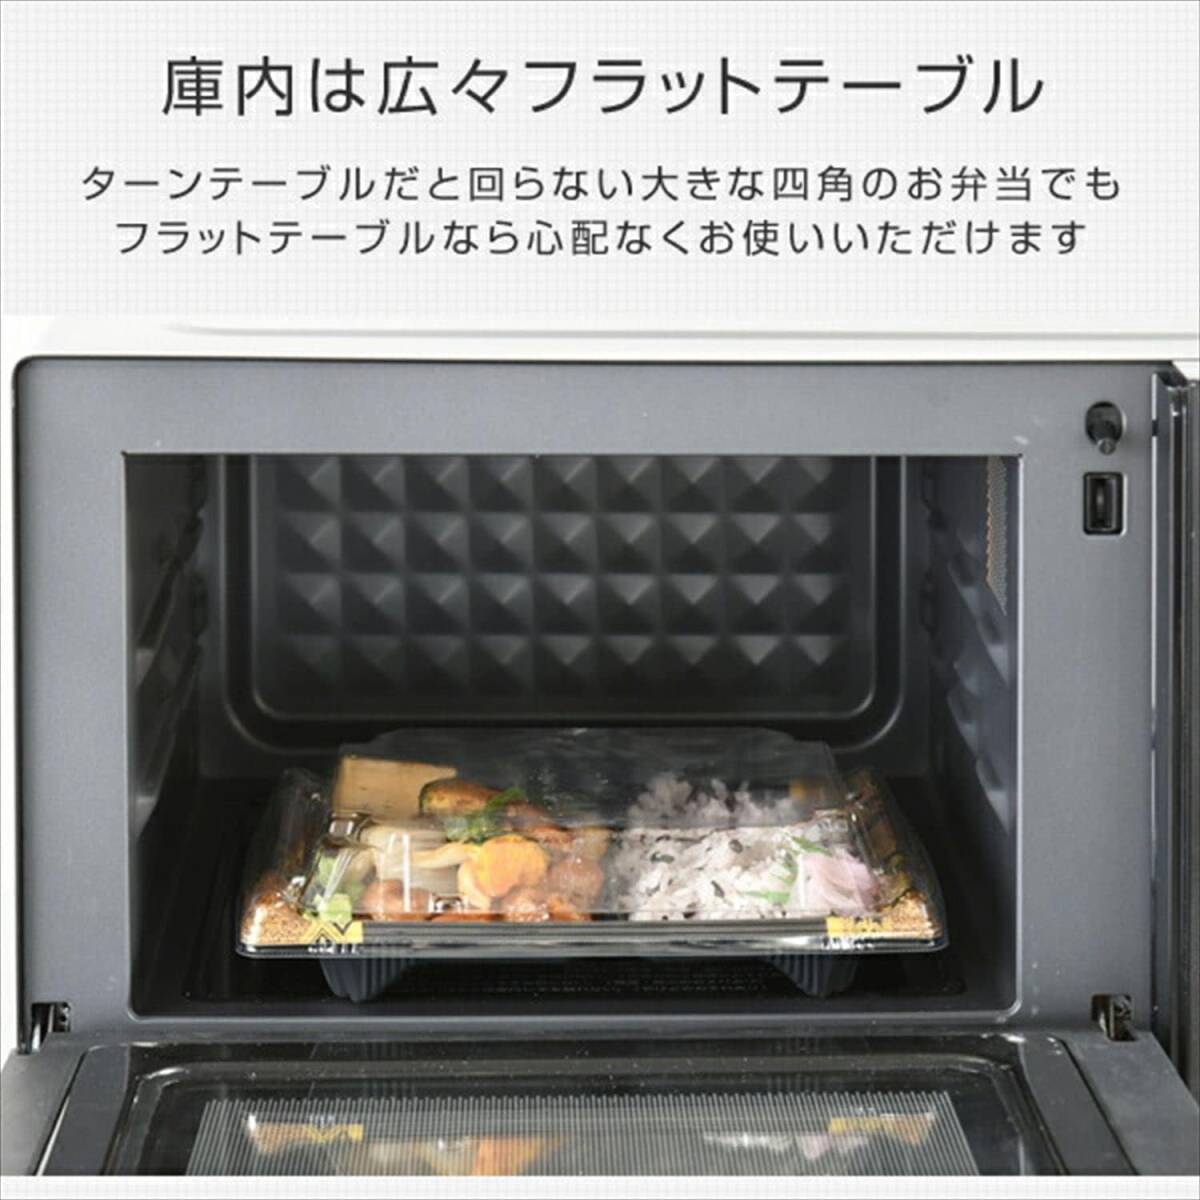  new goods * mountain . microwave oven microwave oven 18Lto- -stroke Flat table auto menu 18 kind grill function black free shipping 11